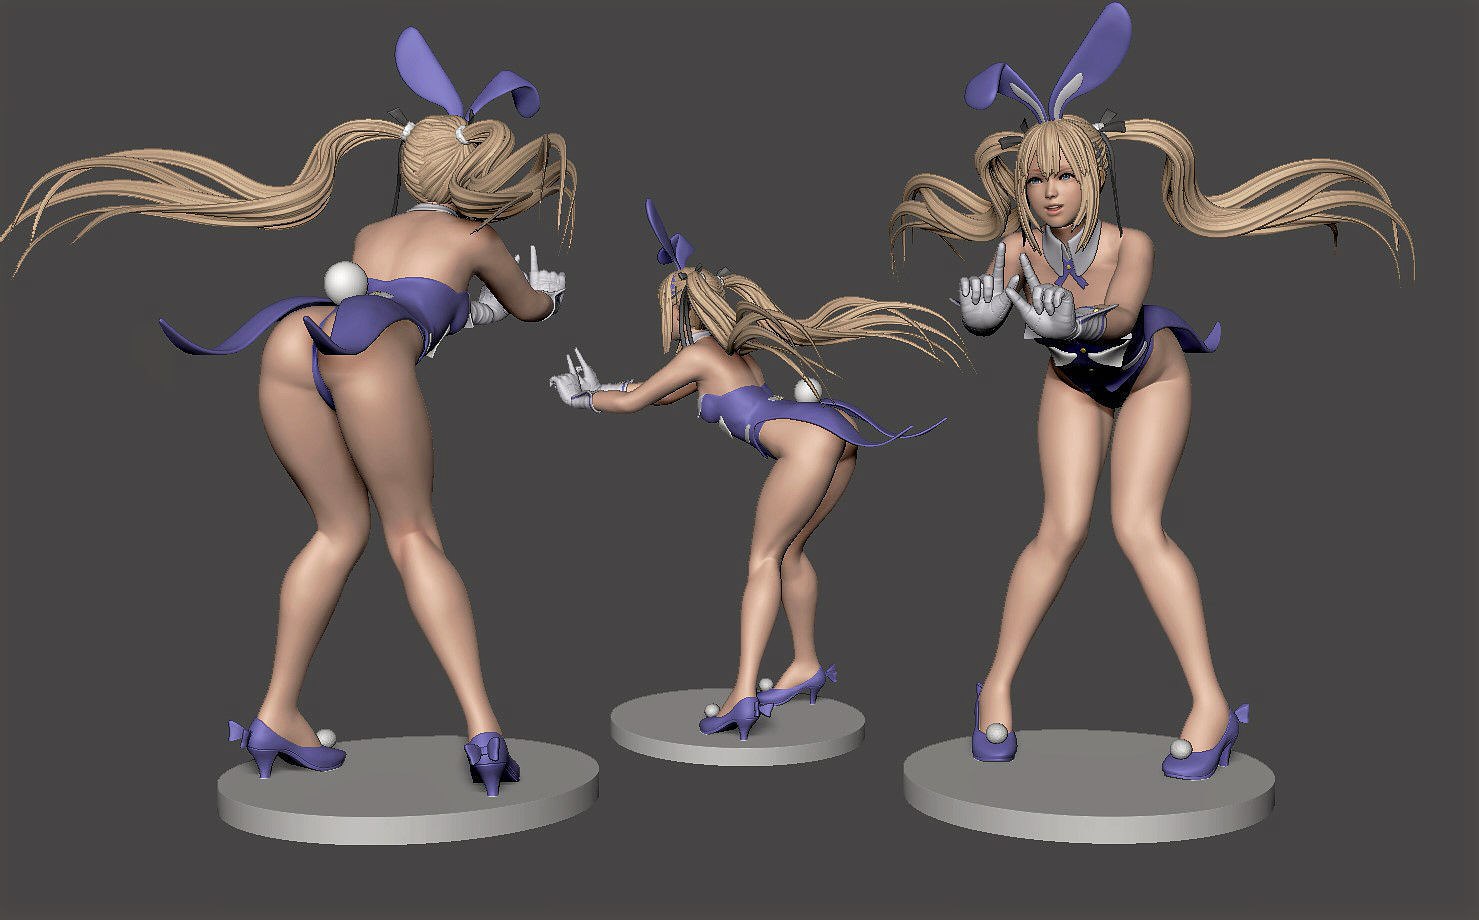 Marie Rose Bunny from Dead or Alive